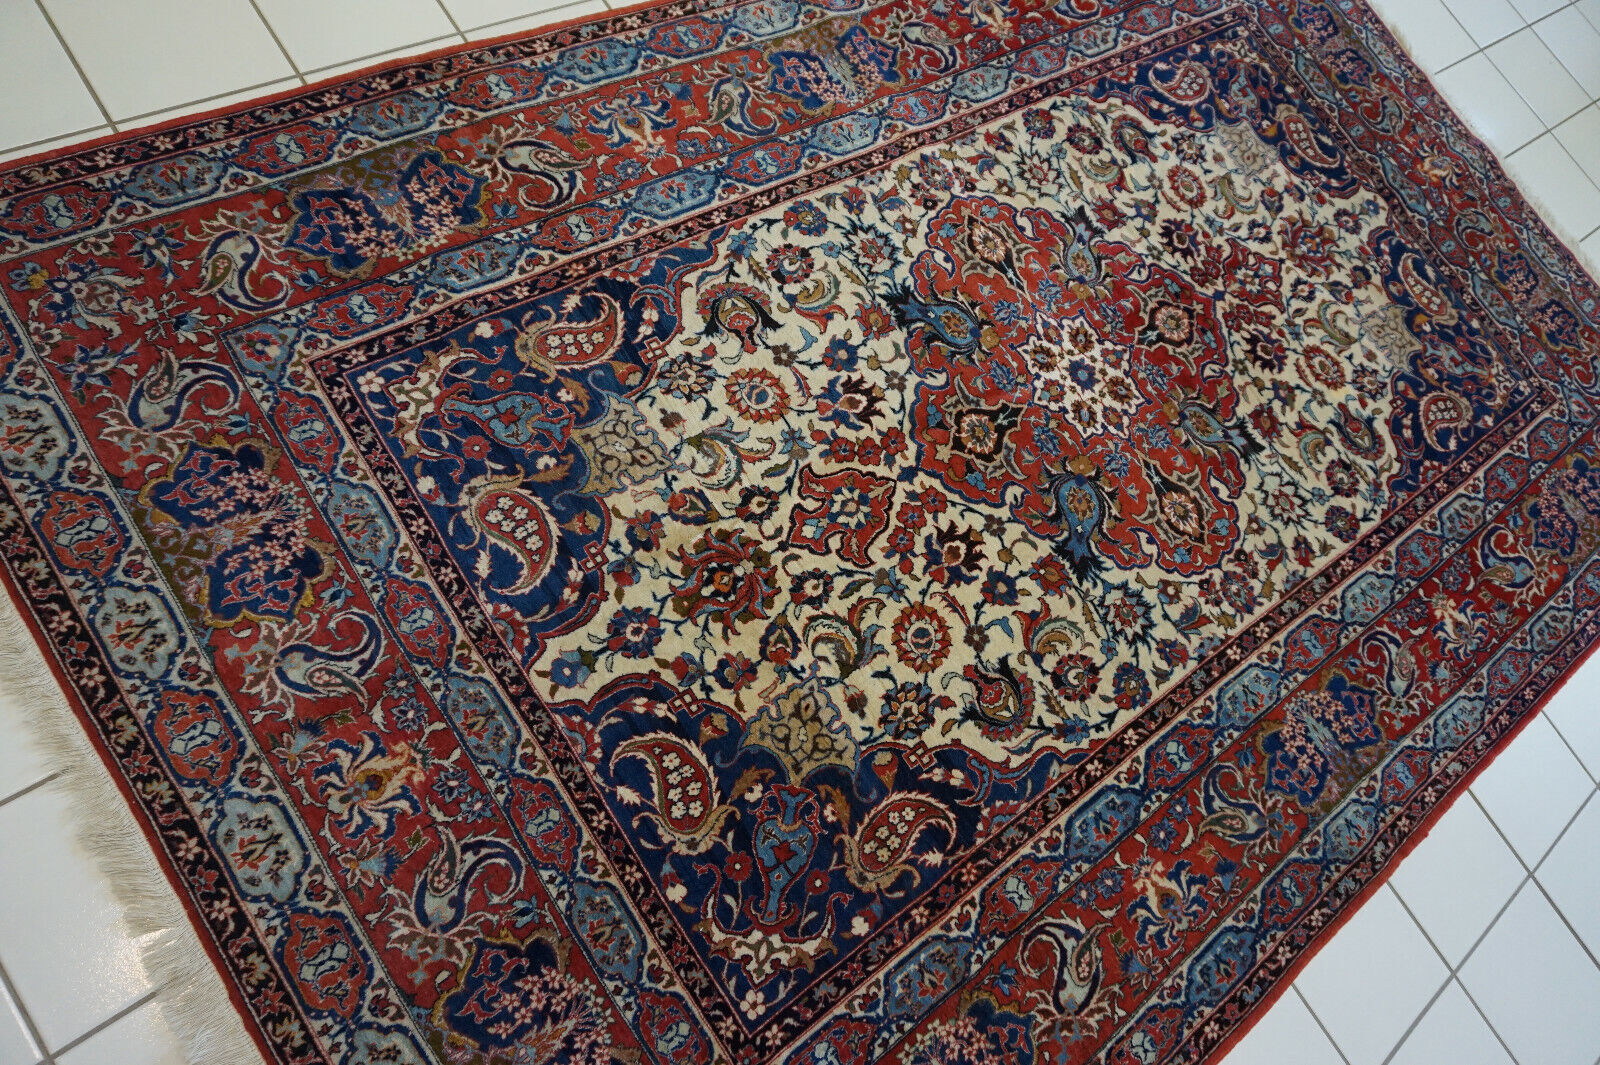 Close-up of the blues interspersed throughout the Handmade Antique Persian Style Isfahan Rug